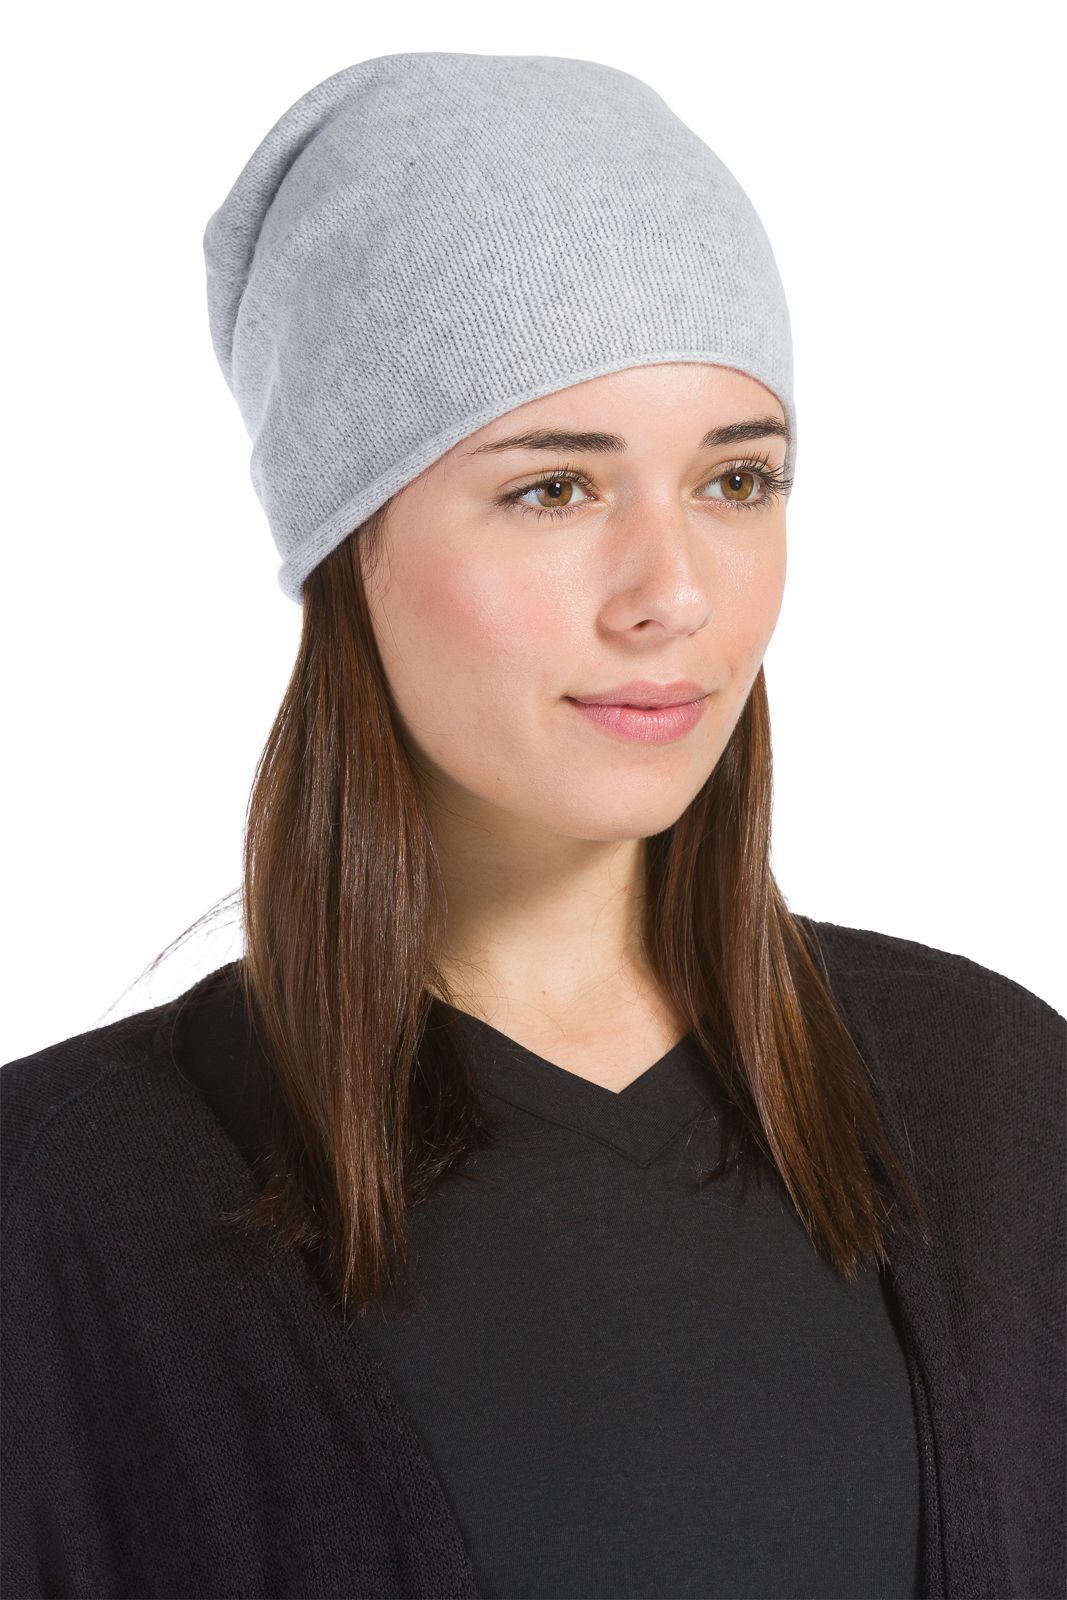 Women's 100% Cashmere Slouchy Beanie Hat Womens>Accessories>Hat Fishers Finery Light Gray One Size Fits Most 